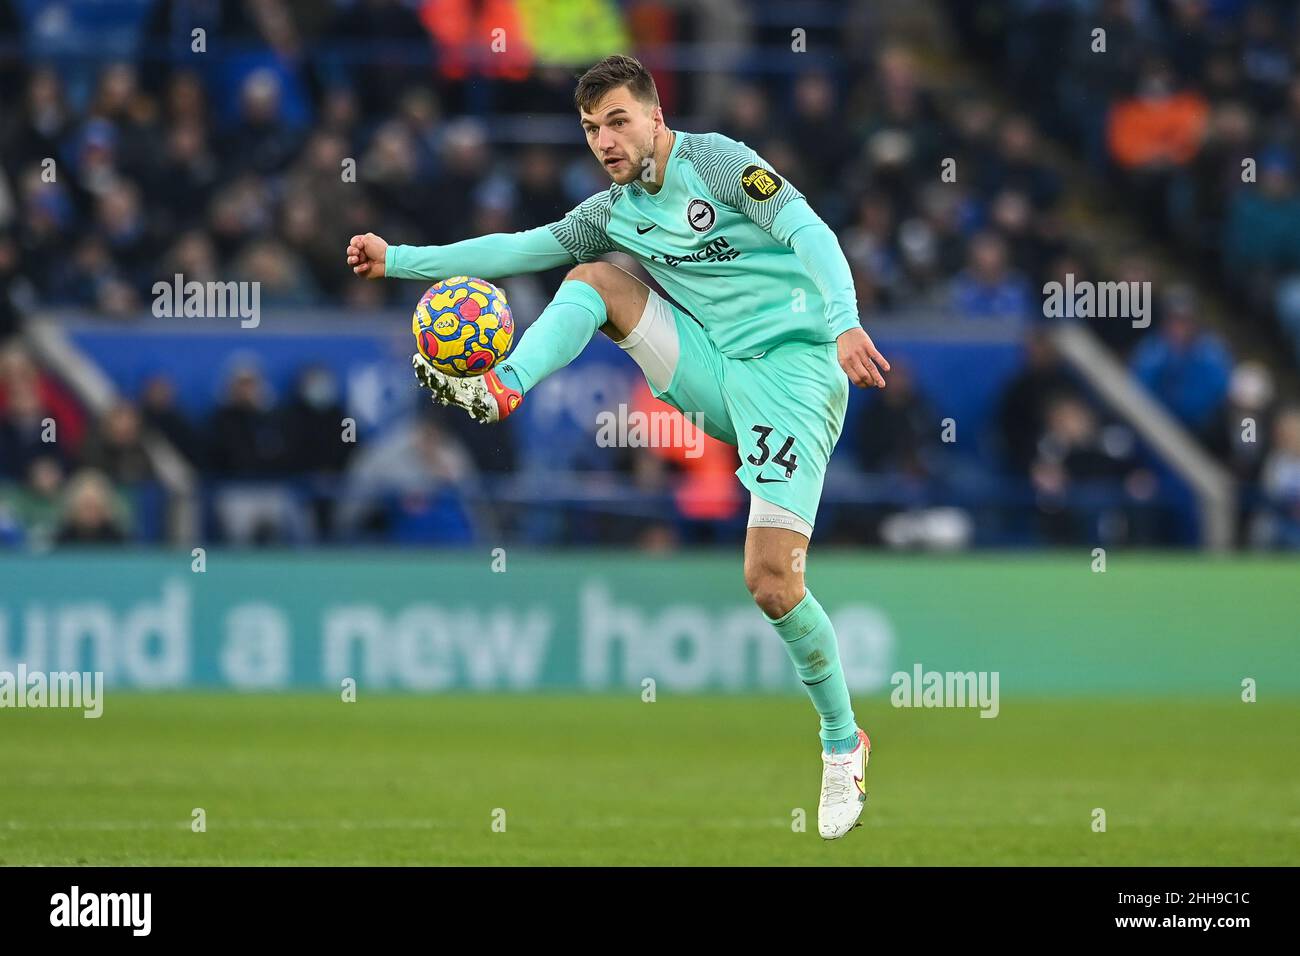 Joël Veltman #34 of Brighton & Hove Albion controls the ball in, on 1/23/2022. (Photo by Craig Thomas/News Images/Sipa USA) Credit: Sipa USA/Alamy Live News Stock Photo